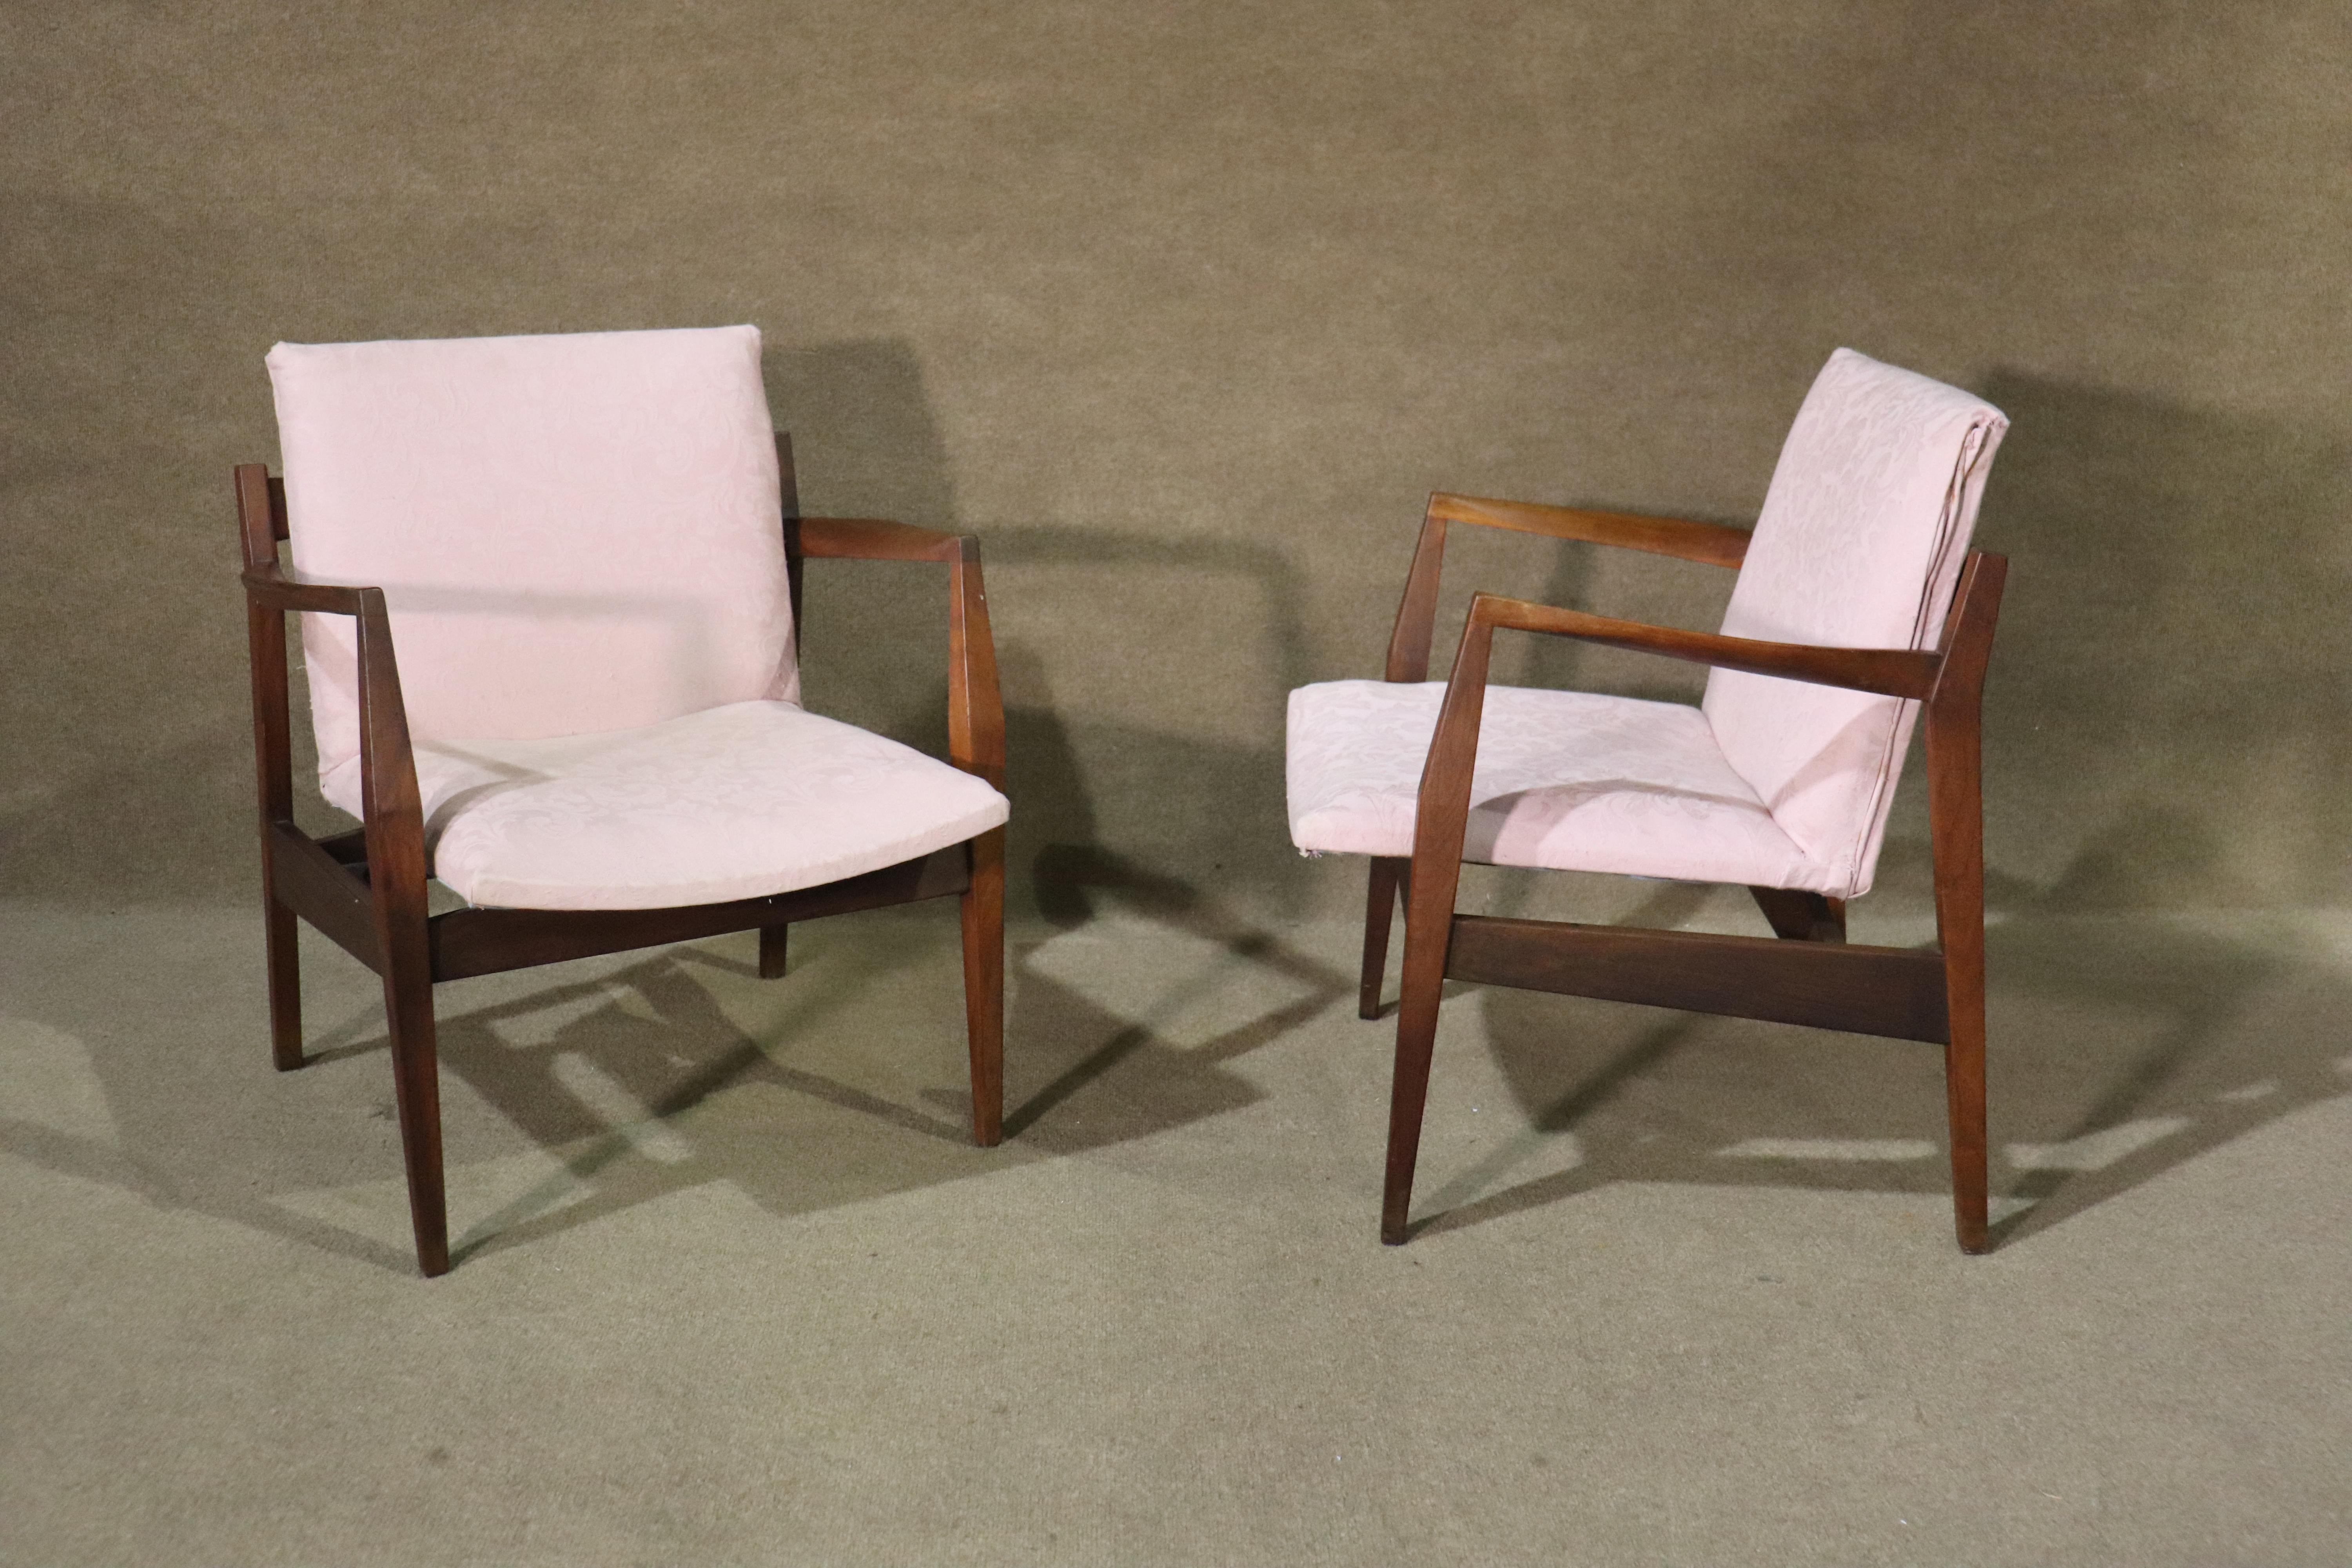 Pair of mid-century modern armchairs by Jens Risom. Teak frames with floating seat.
Please confirm location NY or NJ